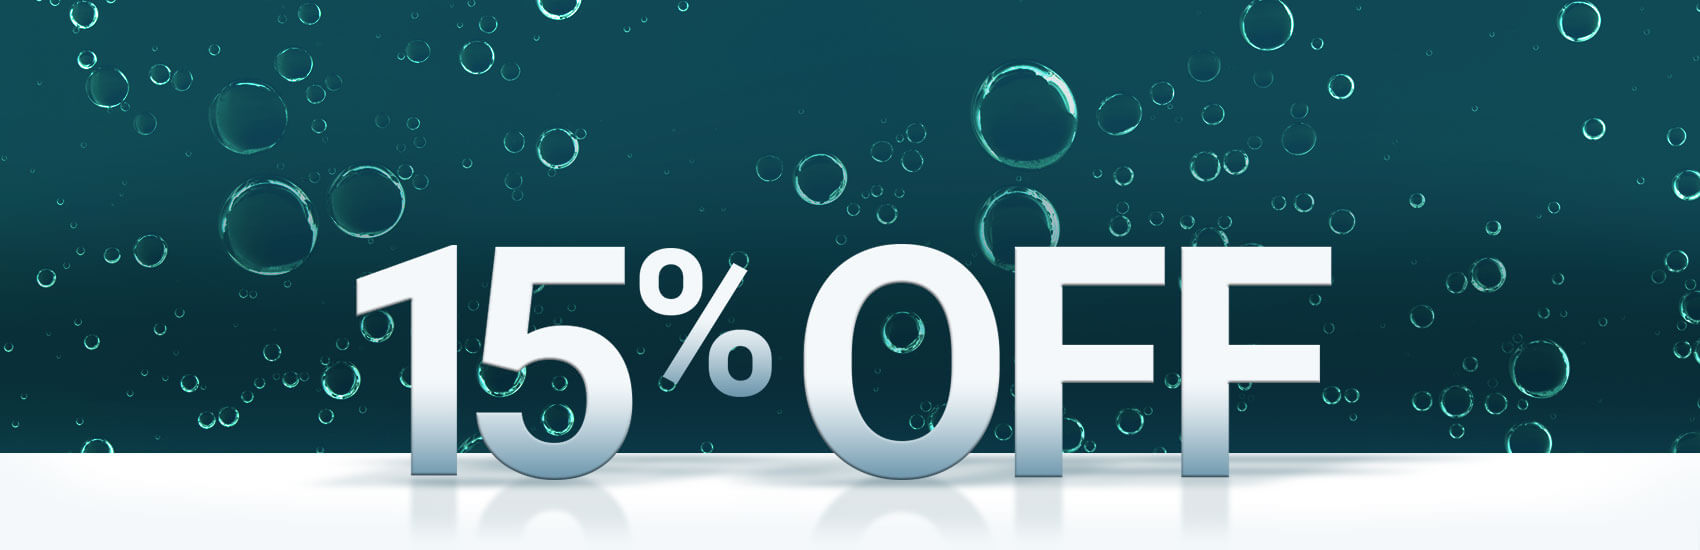 15% off promotion